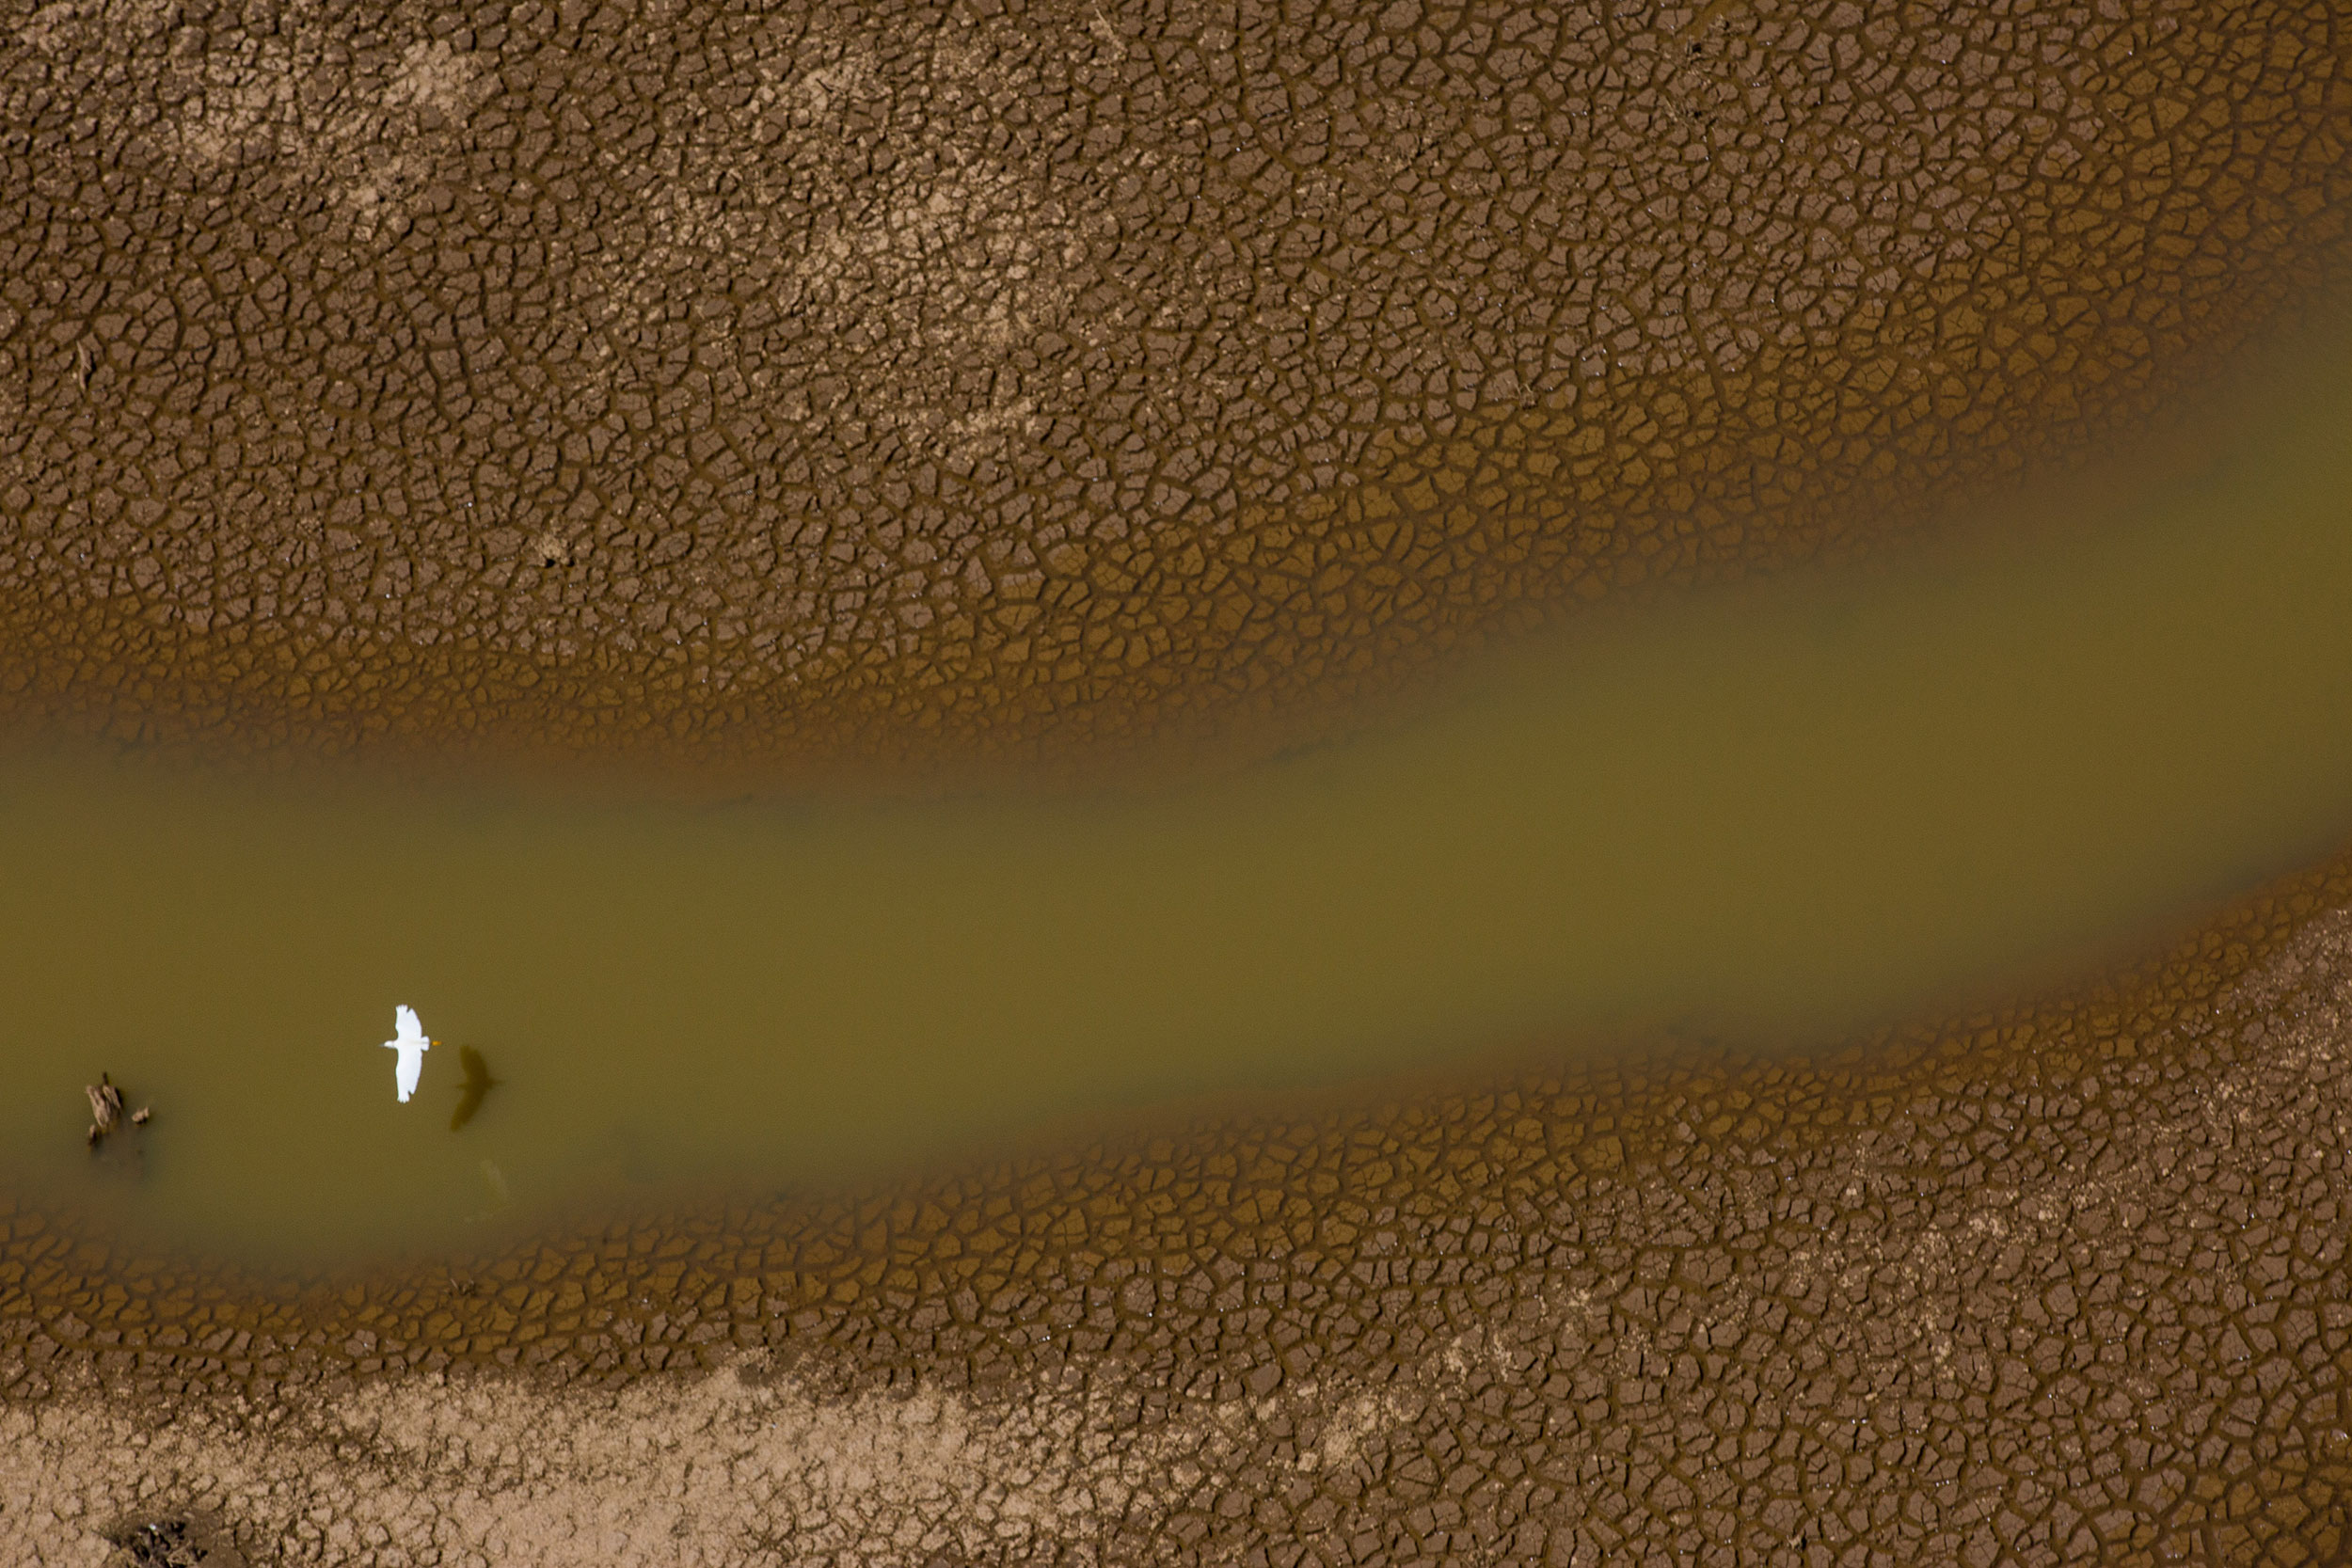 An aerial view of the Atibainha dam, one of the main water reservoirs that supply the State of Sao Paulo, during a drought in Braganca Paulista, Brazil on Feb. 23, 2015.